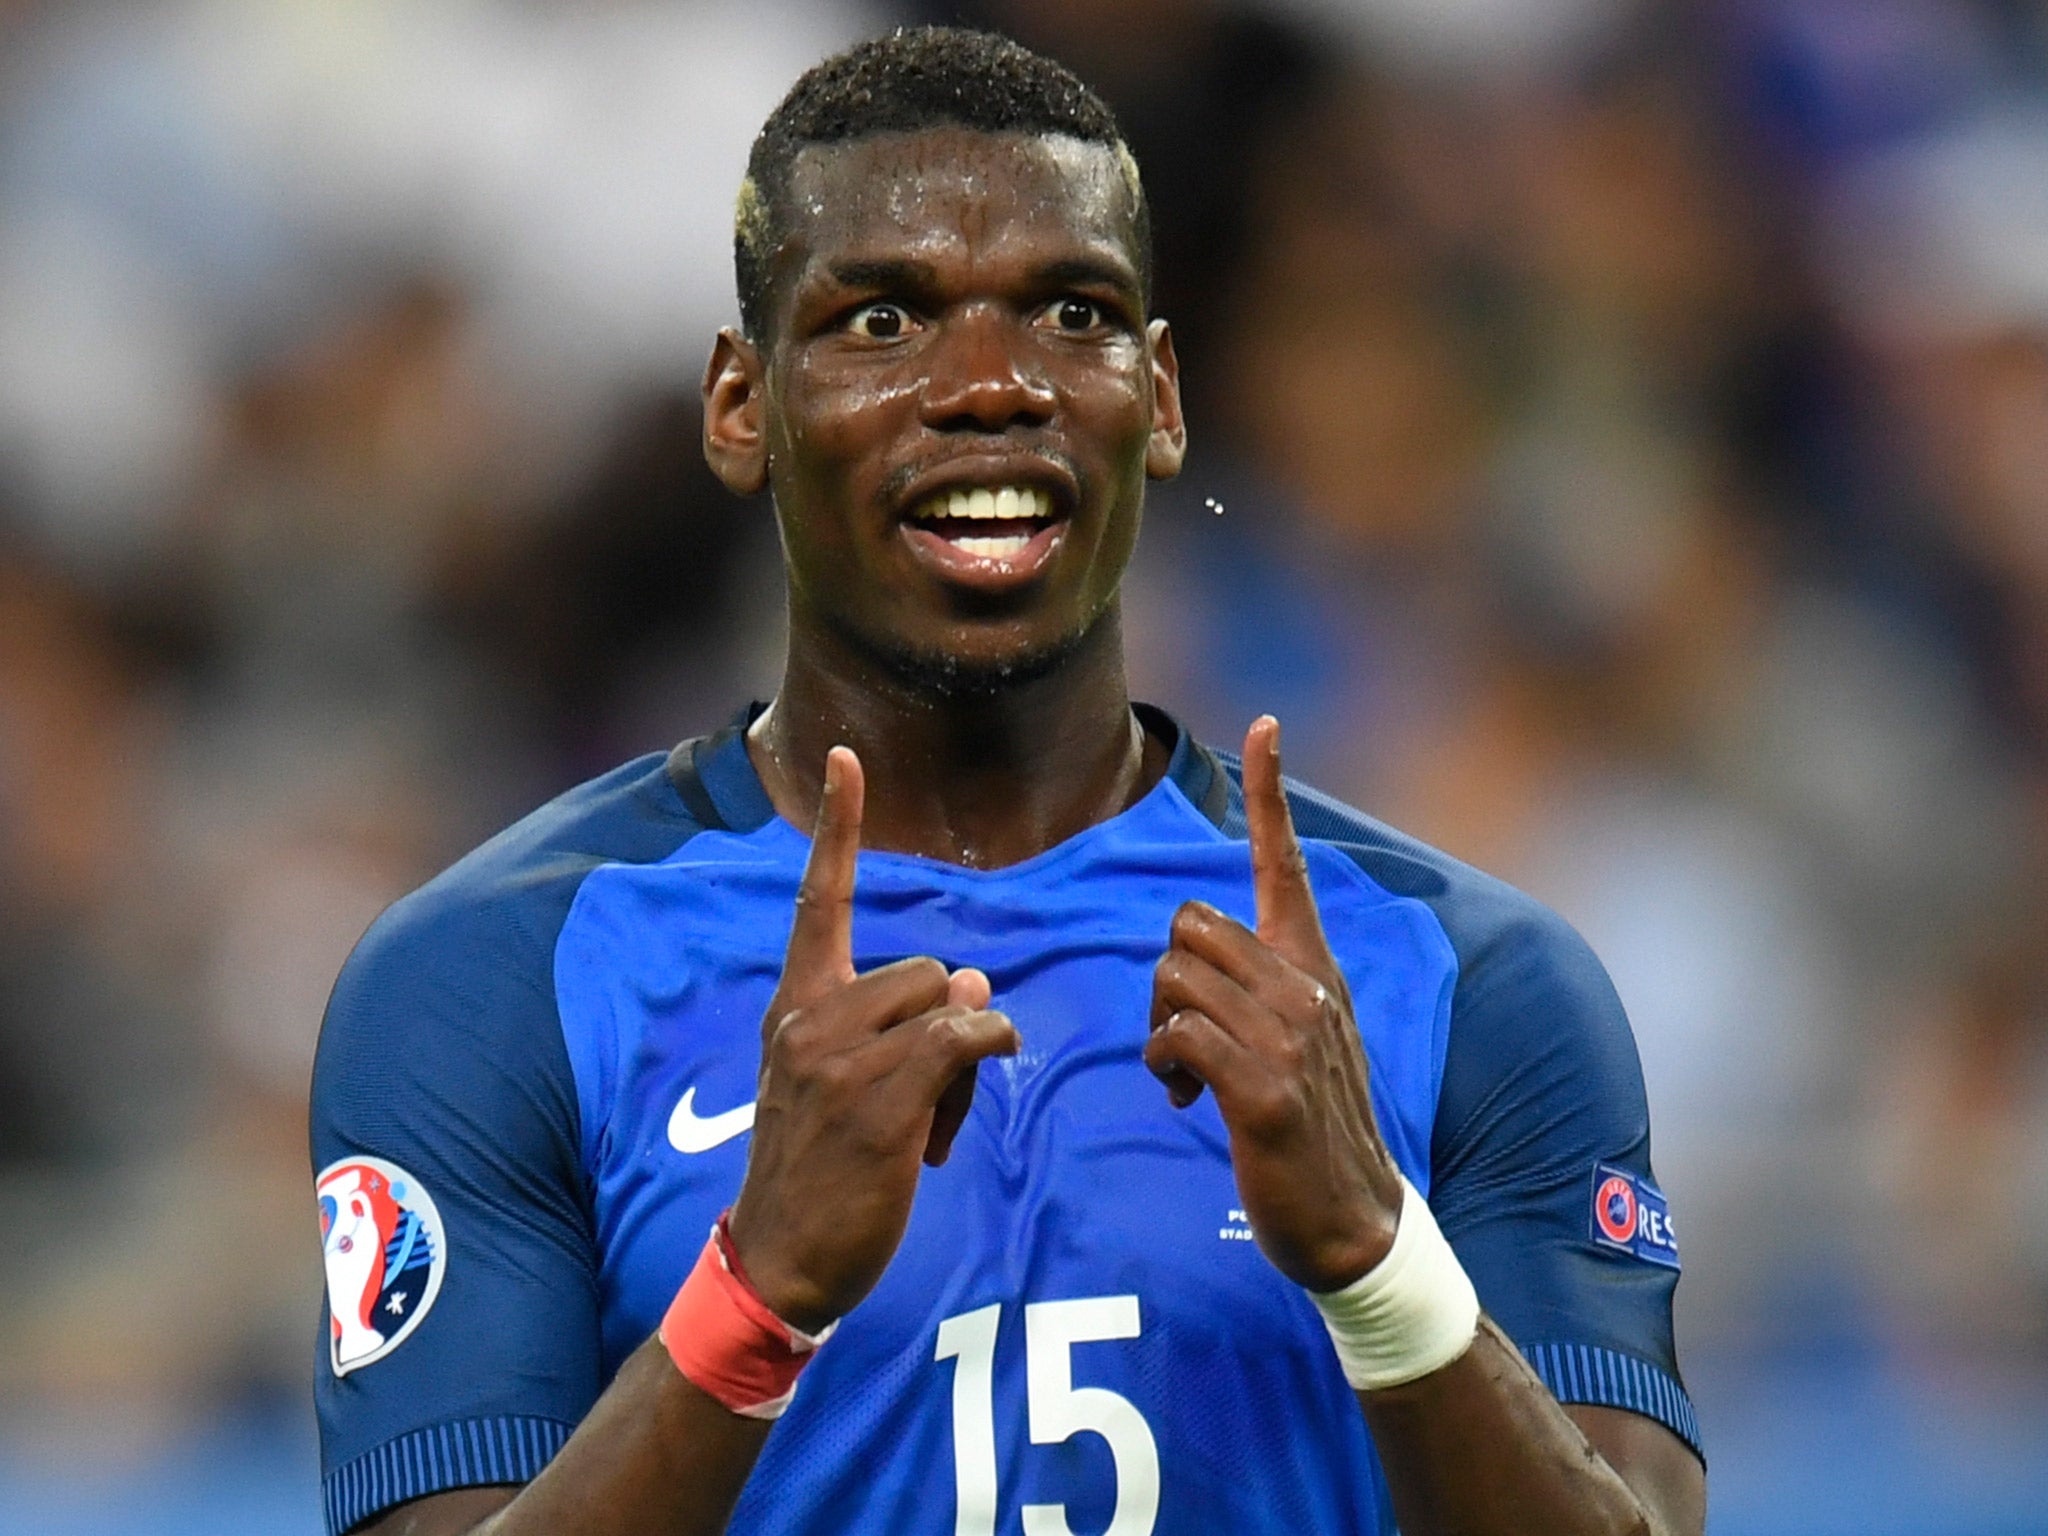 Manchester United are reported to have launched a £92m offer for Paul Pogba